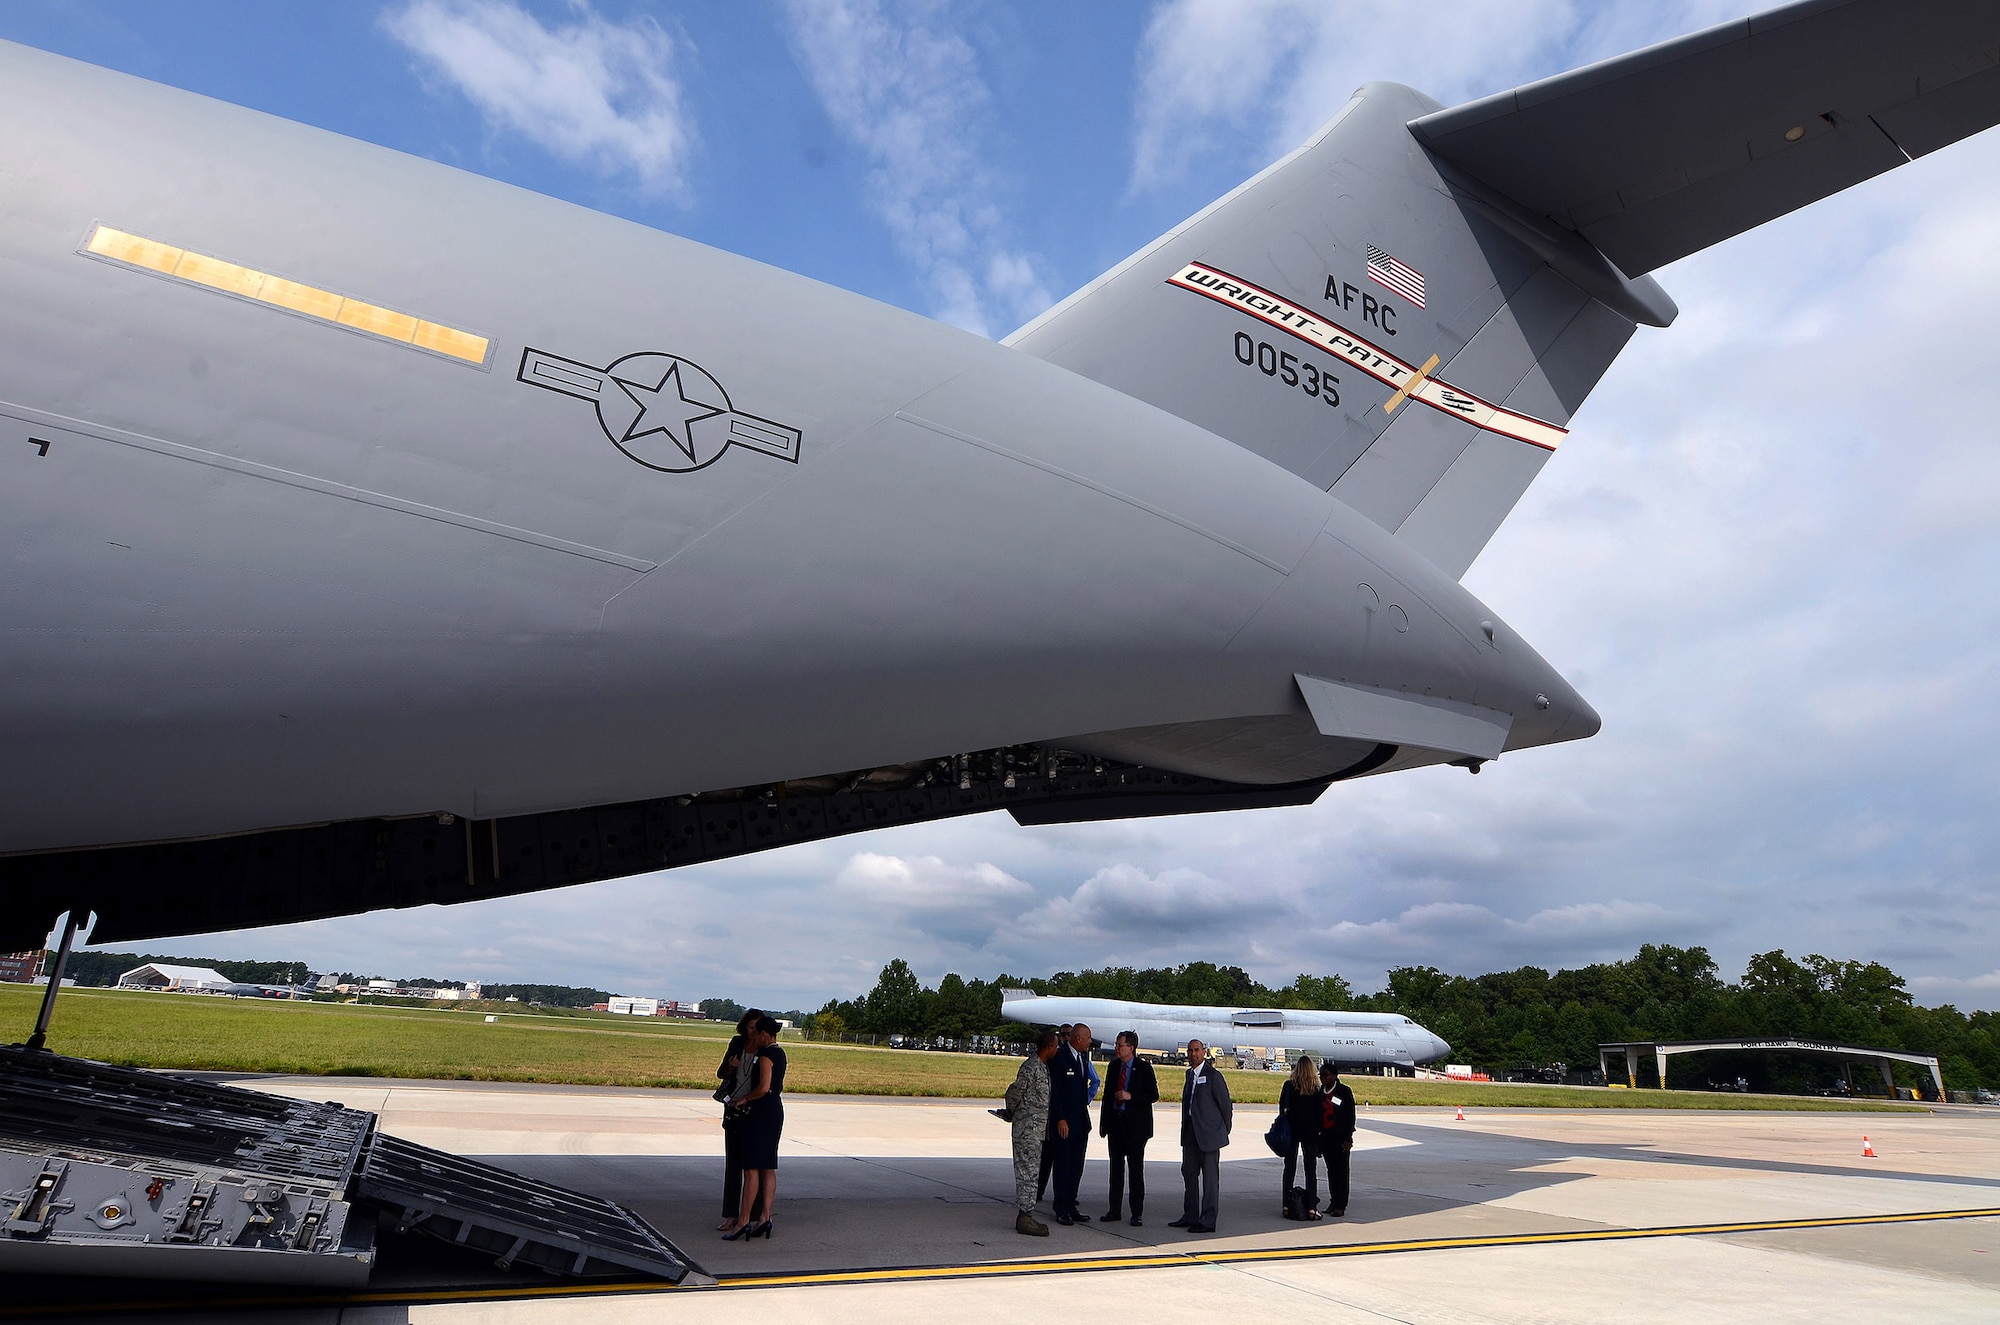 The second Containerized Biocontainment Systems unit is positioned on a U.S. Air Force C-17 to show how the unit could be airlifted to anywhere in the world if needed; Dobbins Air Reserve Base, Ga., Aug. 11, 2015. The two Containerized Biocontainment units were built by MRIGlobal through a partnership with the U.S. State Dept. and the Paul G. Allen Ebola Program to be positioned at Dobbins ARB, ready for future. (U.S. Air Force photo/ Brad Fallin)